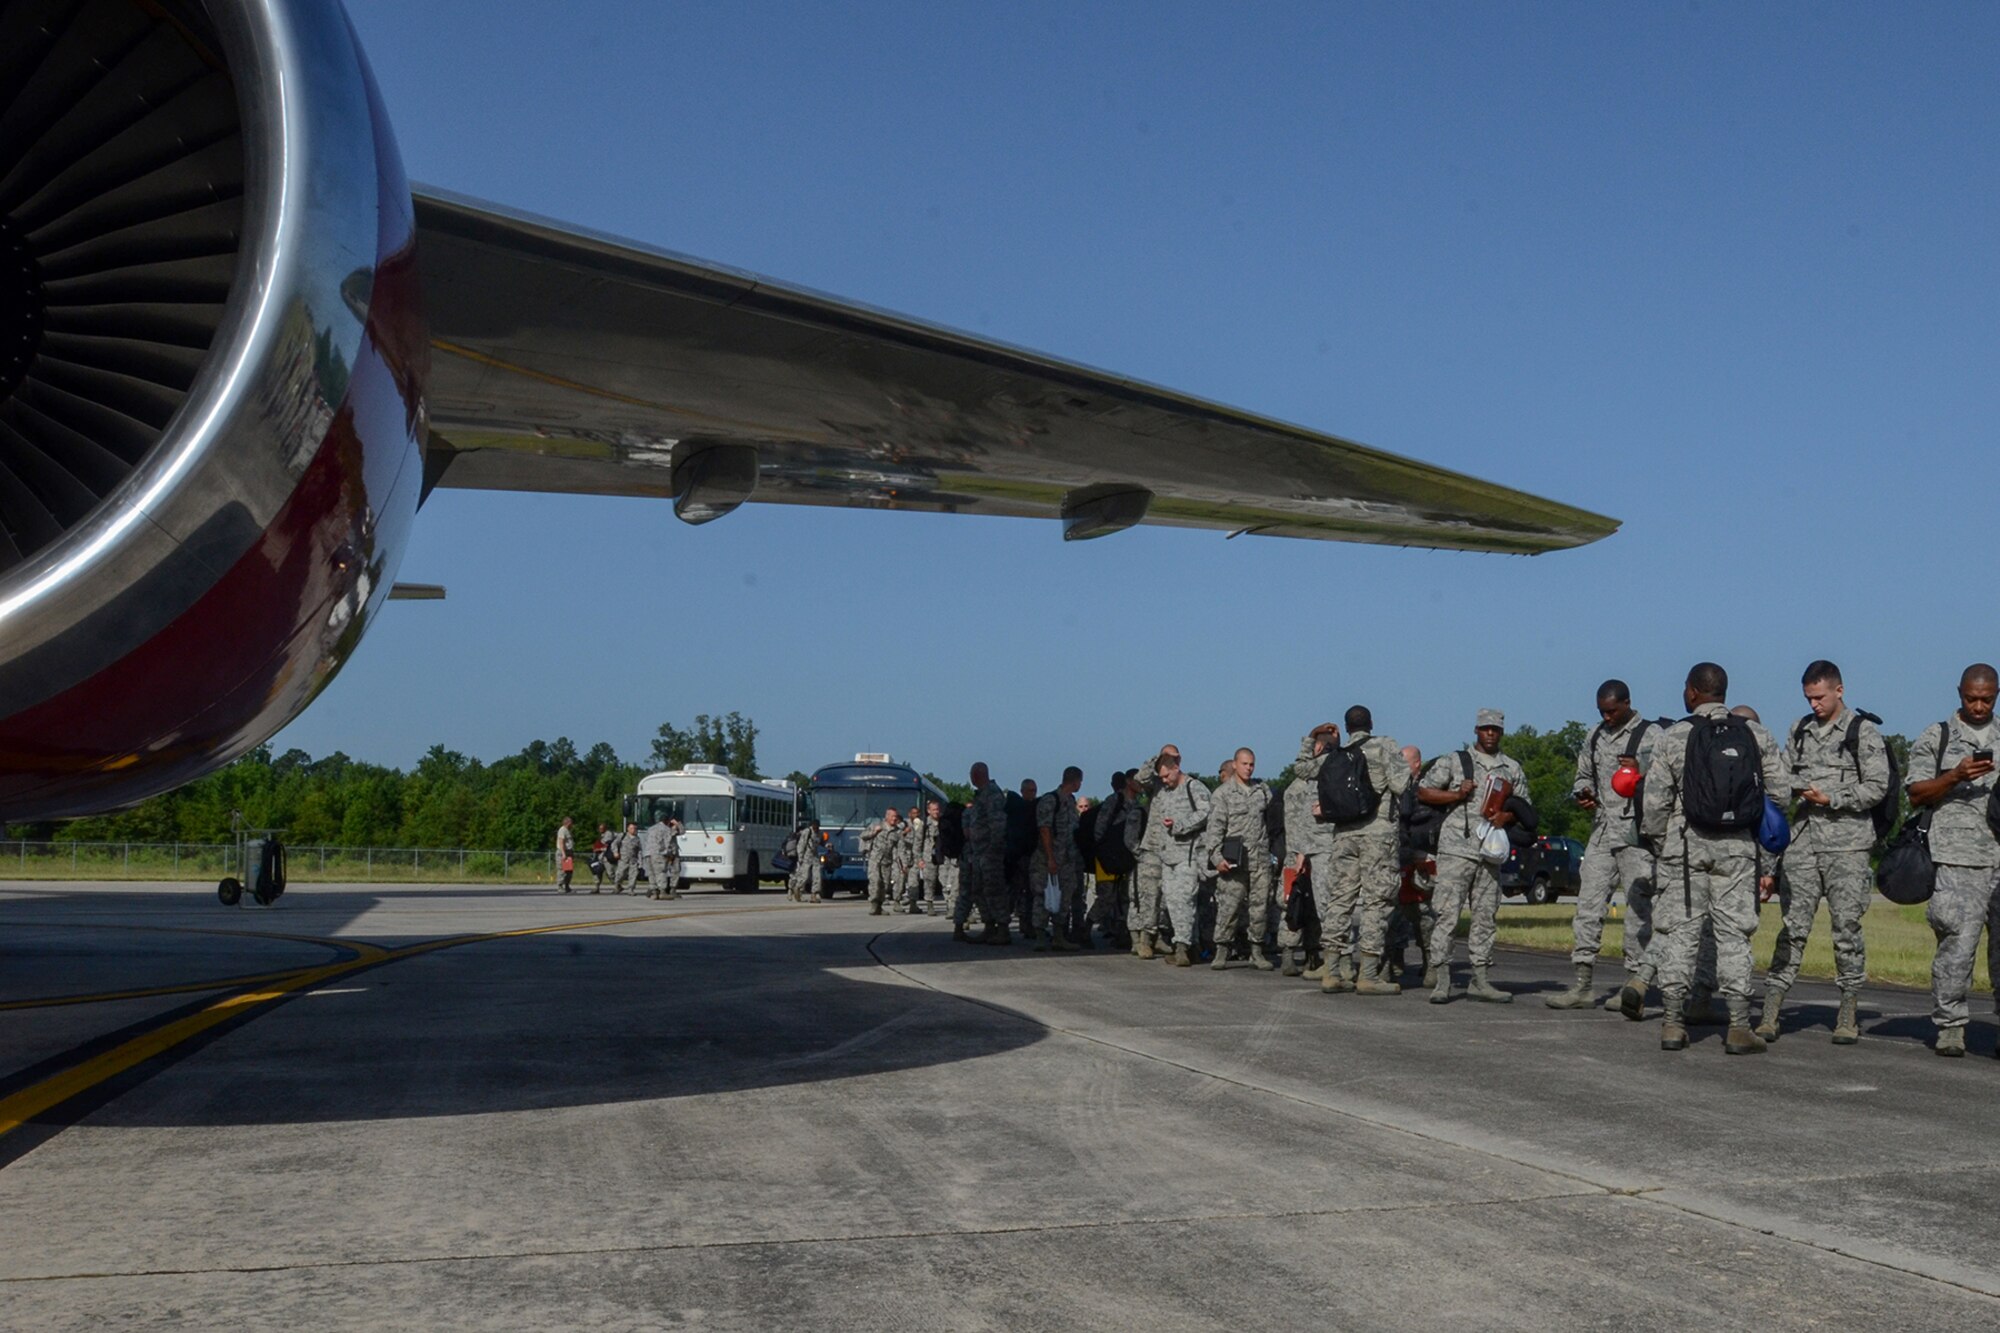 U.S. Air Force Airmen assigned to the South Carolina Air National Guard prepare to board a Boeing 767 transport aircraft at McEntire Joint National Guard Base, S.C., July 13, 2016. Approximately 300 U.S. Airmen and 12 F-16 Fighting Falcon fighter jets from the 169th Fighter Wing at McEntire JNGB, S.C., are deploying to Osan Air Base, Republic of Korea, as the 157th Expeditionary Fighter Squadron in support of the U.S. Pacific Command Theater Security Package. (U.S. Air National Guard photo by Airman 1st Class Megan Floyd)